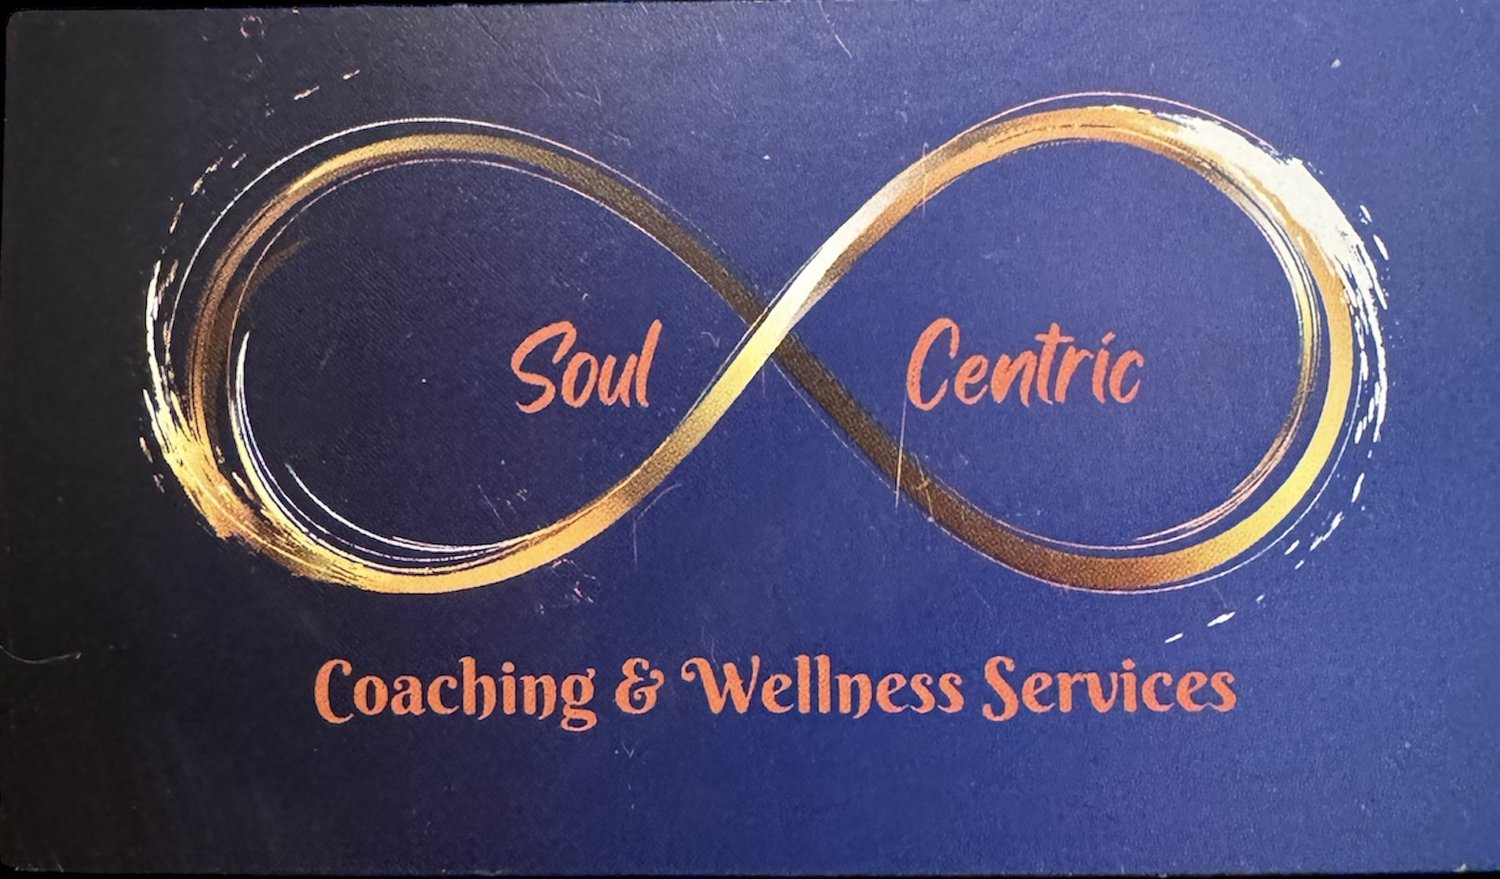 Soul Centric Coaching and Wellness Services